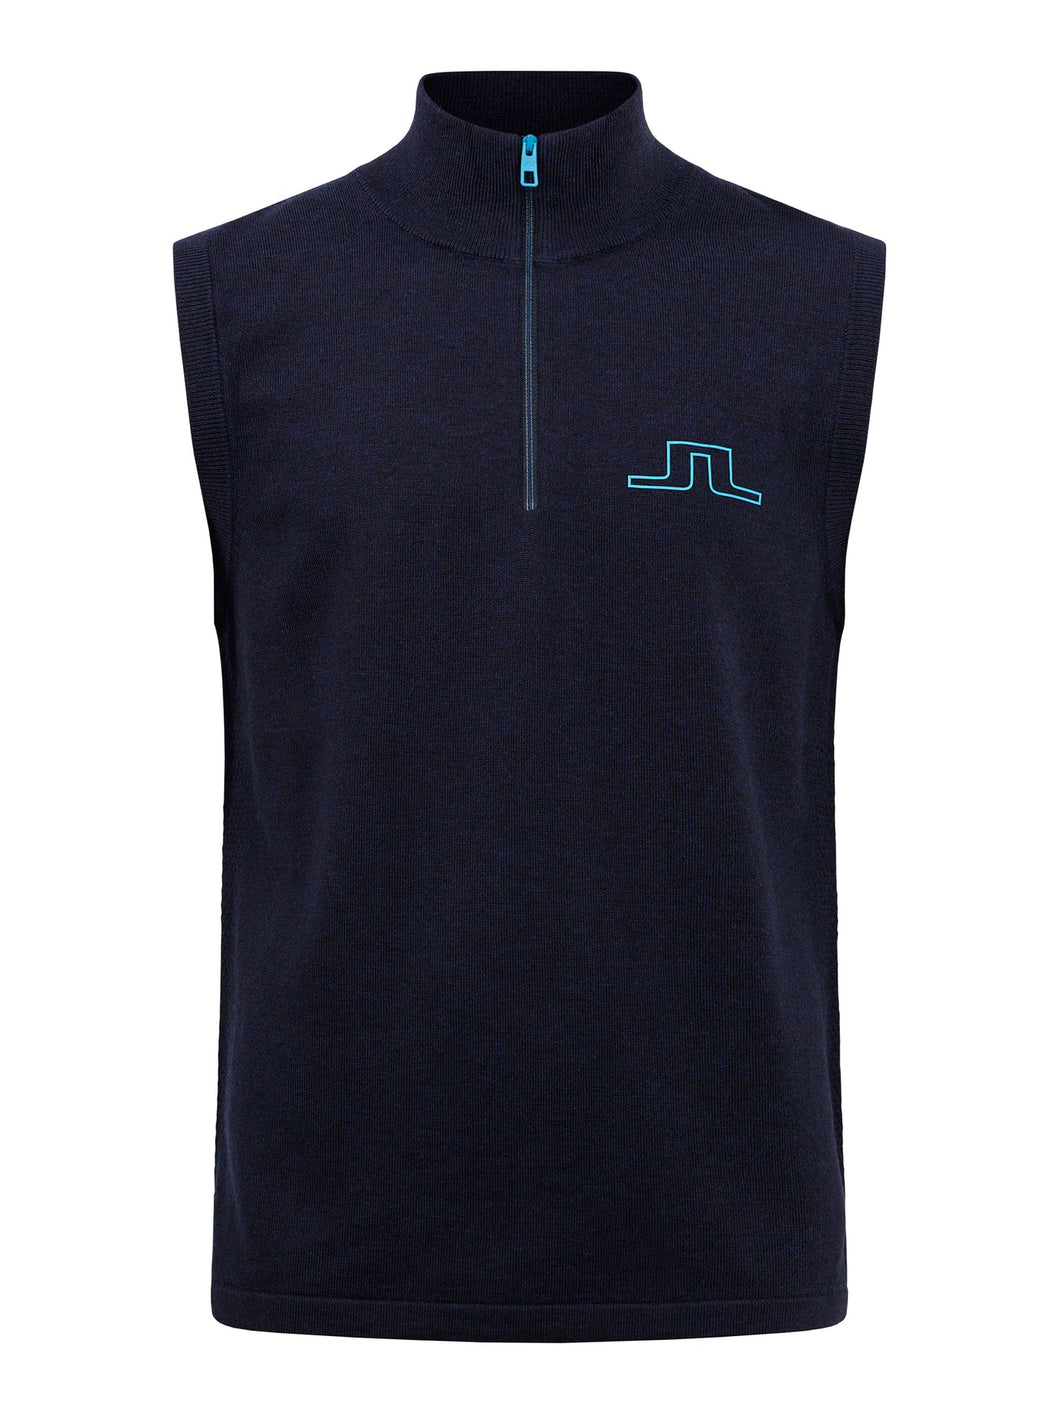 JL Men's Rodgers Golf Pull Over